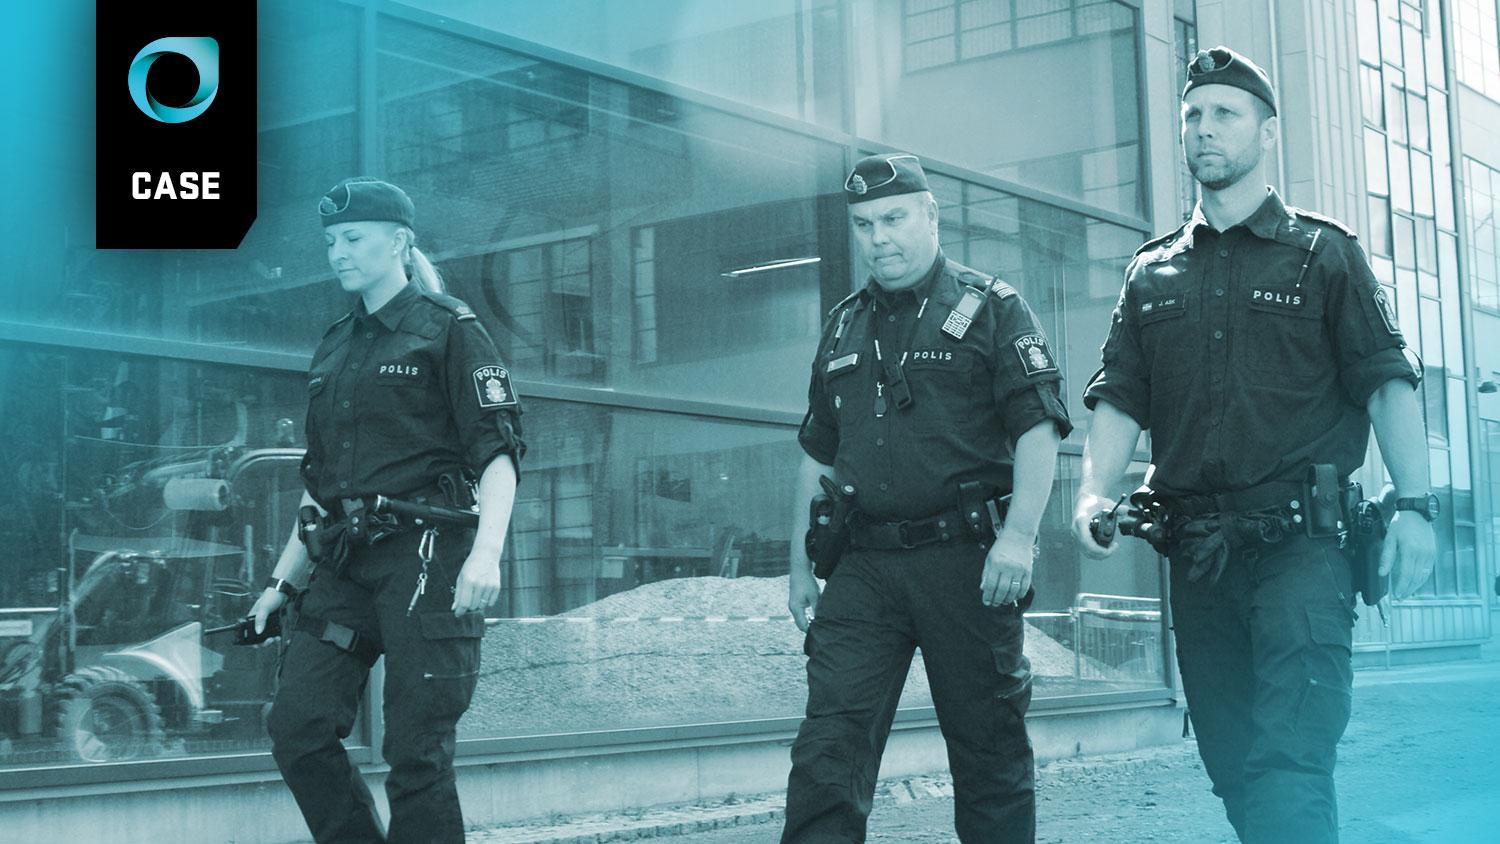 The Swedish Police use Sepura in all divisions